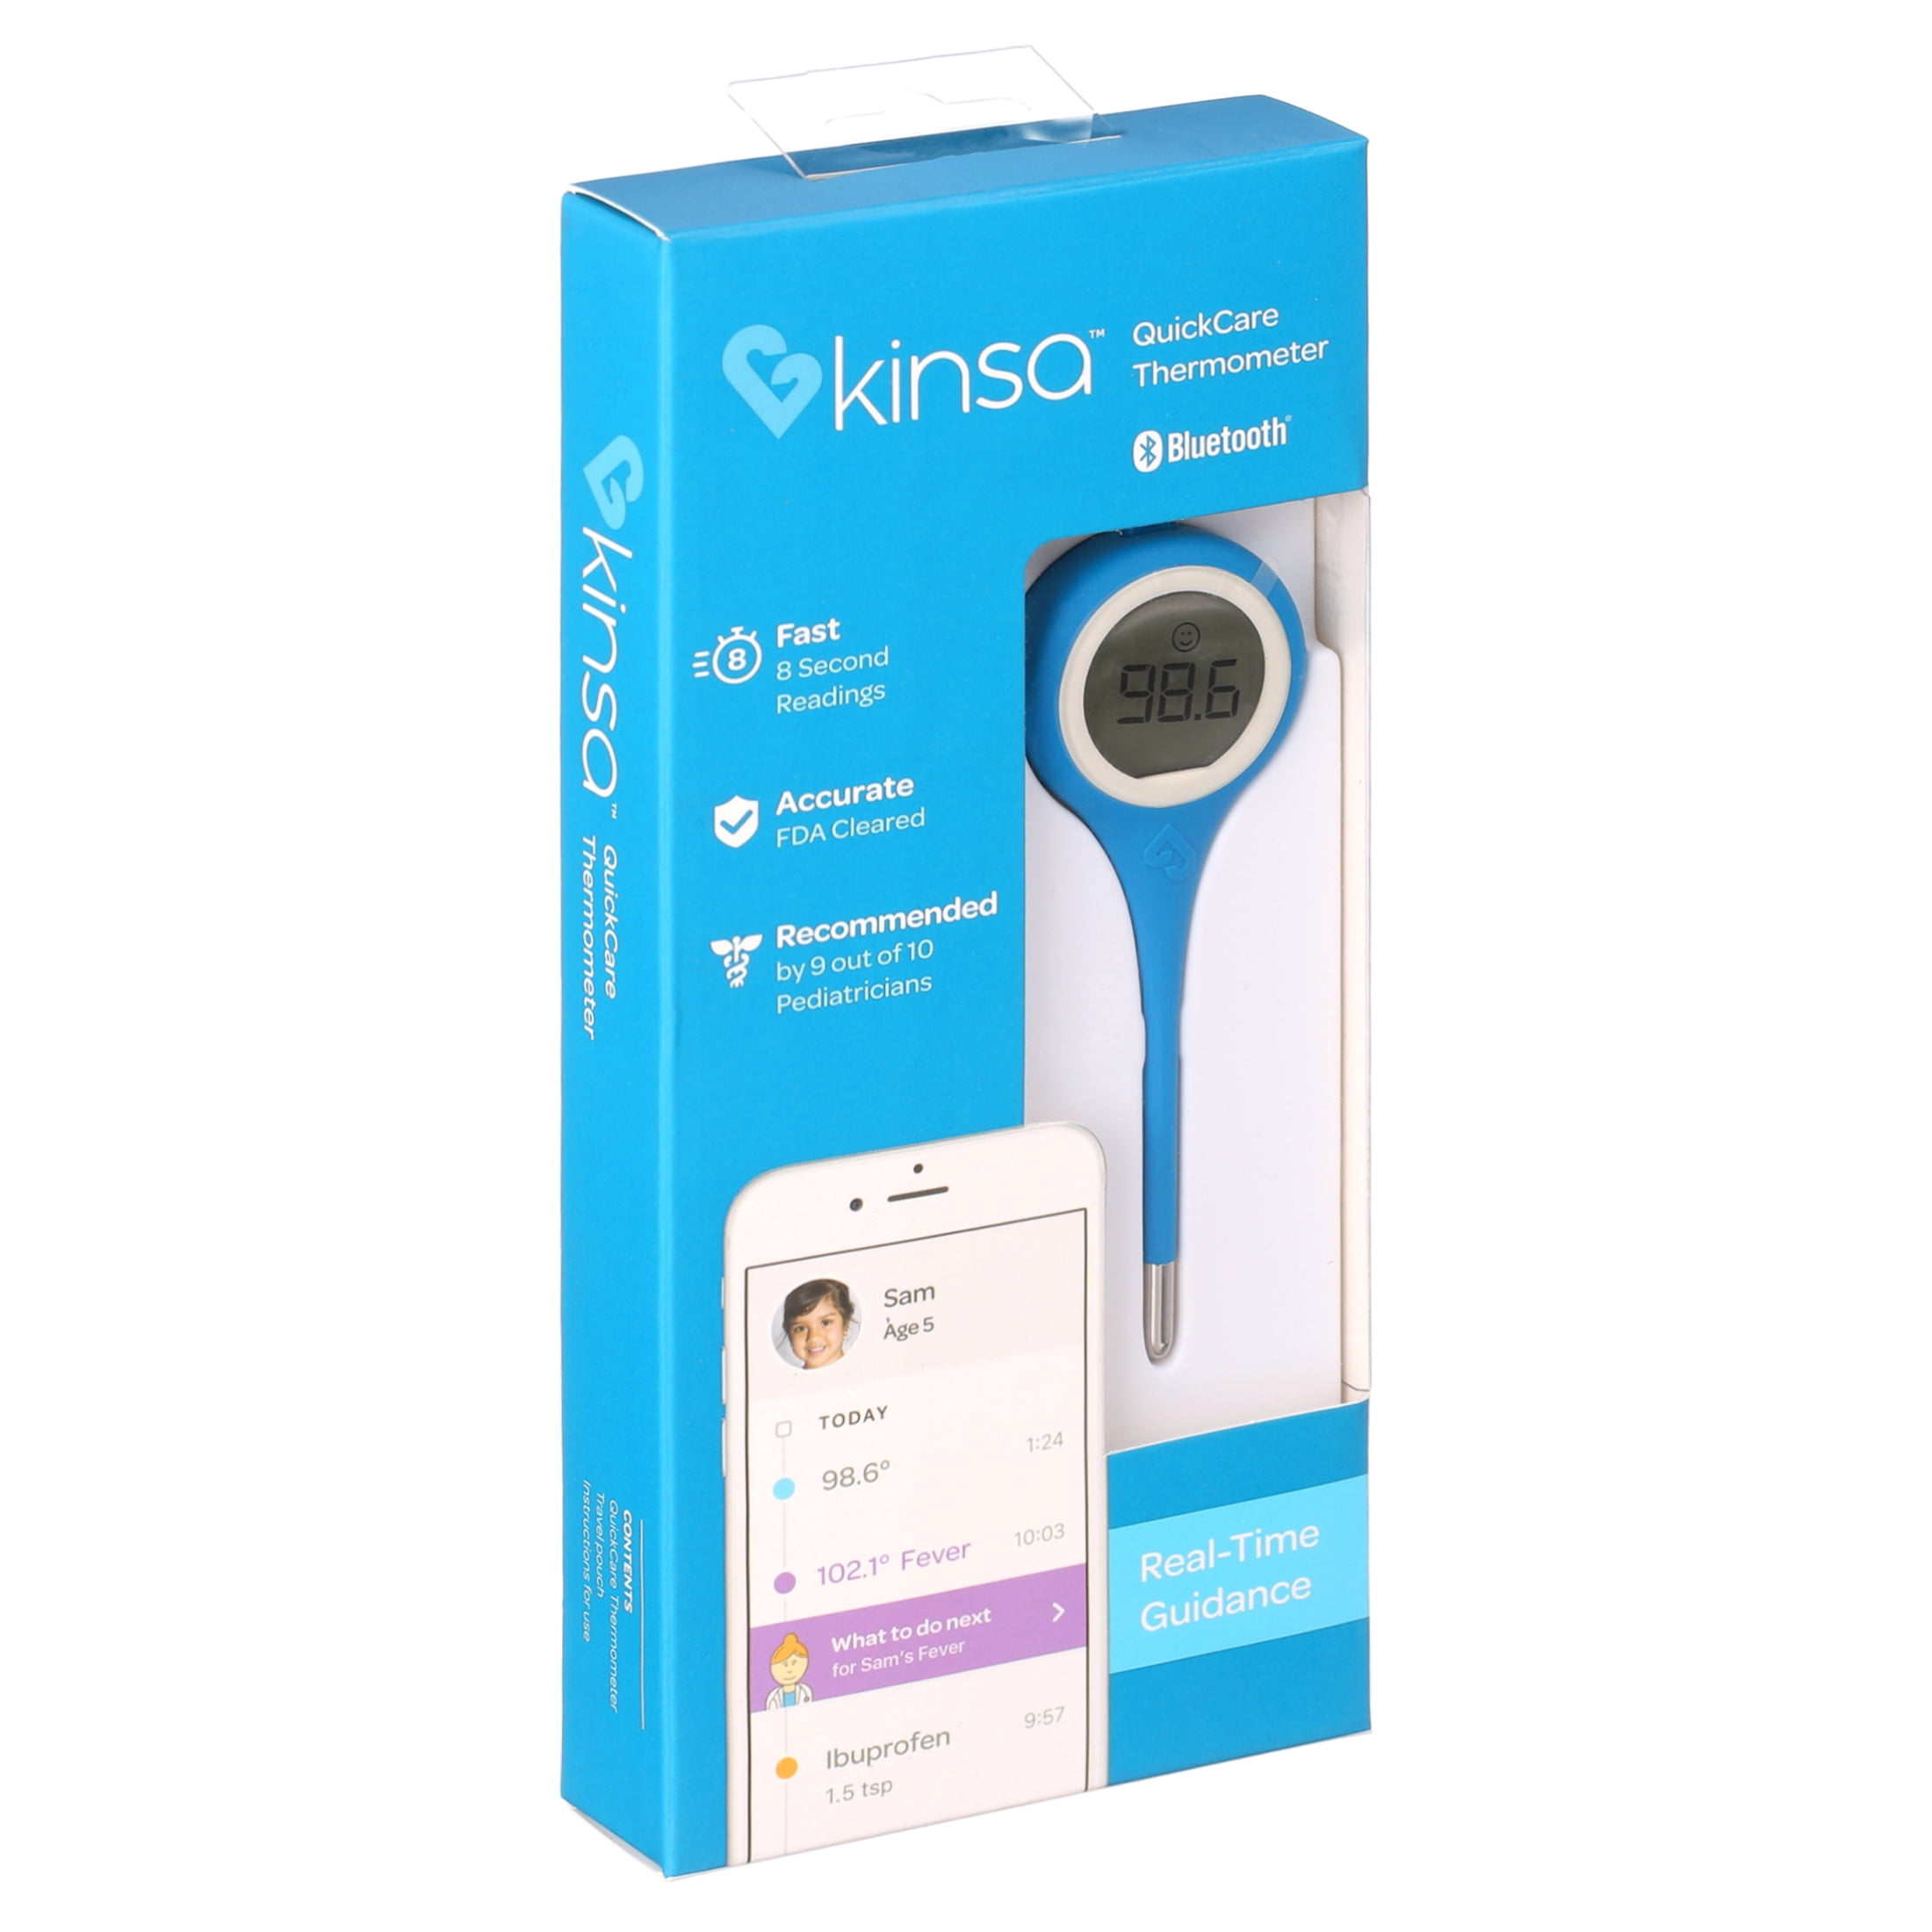 Kinsa Quick Scan Non-Contact Smart Thermometer for Fever, Smartphone App